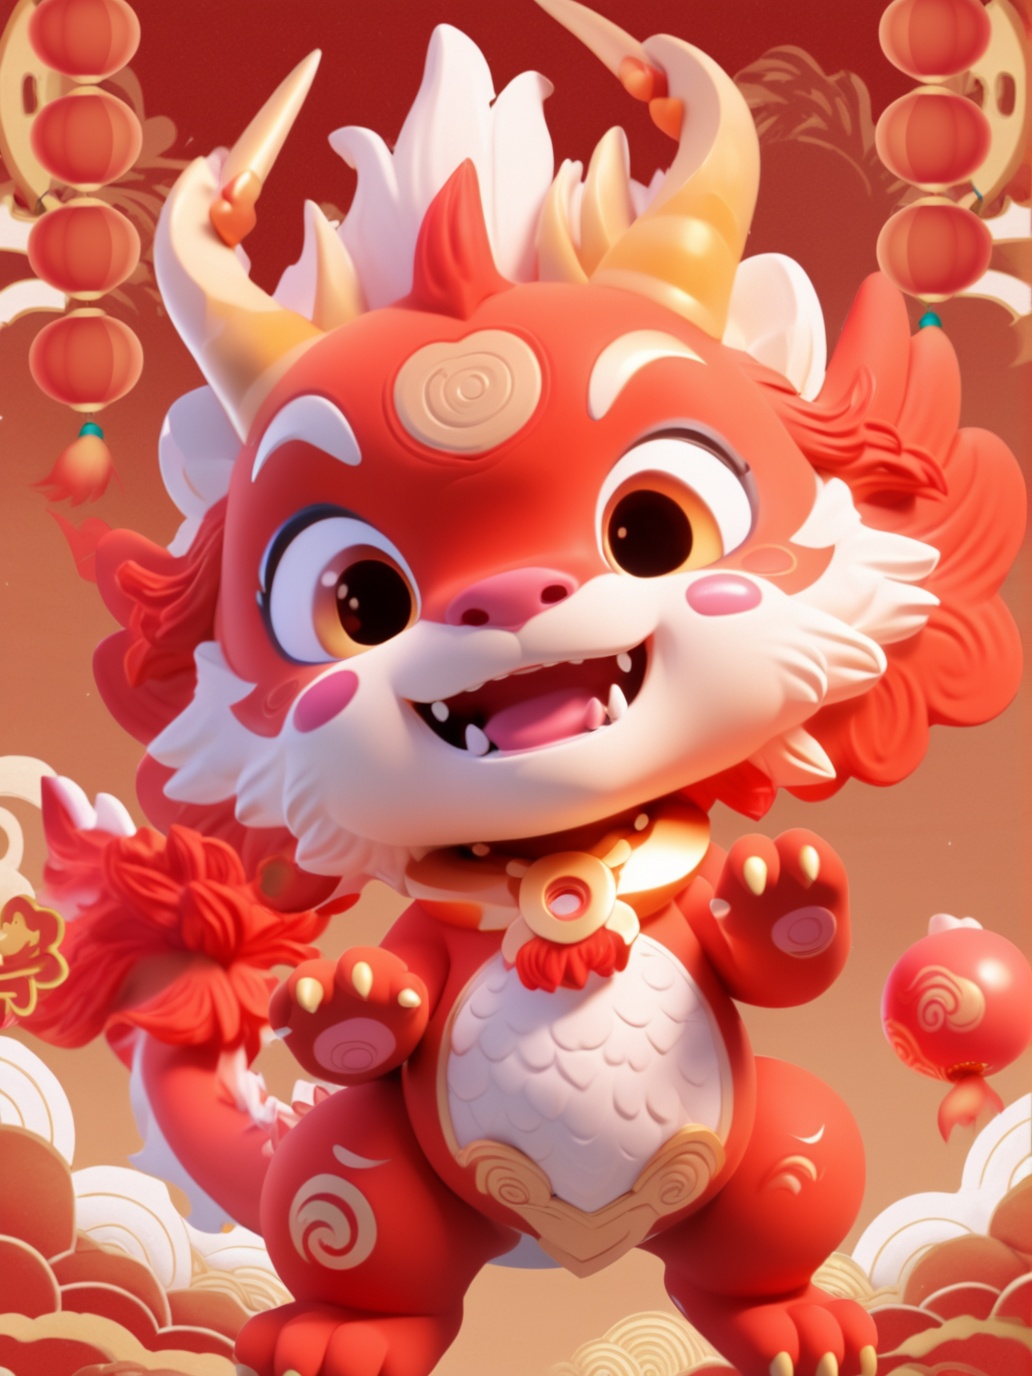 a vibrant and animated character that appears to be a fusion of a lion and a dragon. The character is predominantly red with white and gold accents. It has large, expressive eyes with a mix of blue and green hues. The character is adorned with a traditional Chinese lion dance mask, which is white with red and gold details. The mask has two large, round eyes and a prominent, curved mouth. The character is also wearing a golden necklace with a circular pendant. It has a playful expression, with its mouth open, revealing its teeth, and its tail is curled up, resembling a lion's tail. The character is set against a gradient background that transitions from a light pinkish hue at the top to a deeper pinkish-red at the bottom<lora:LONG IP:1>